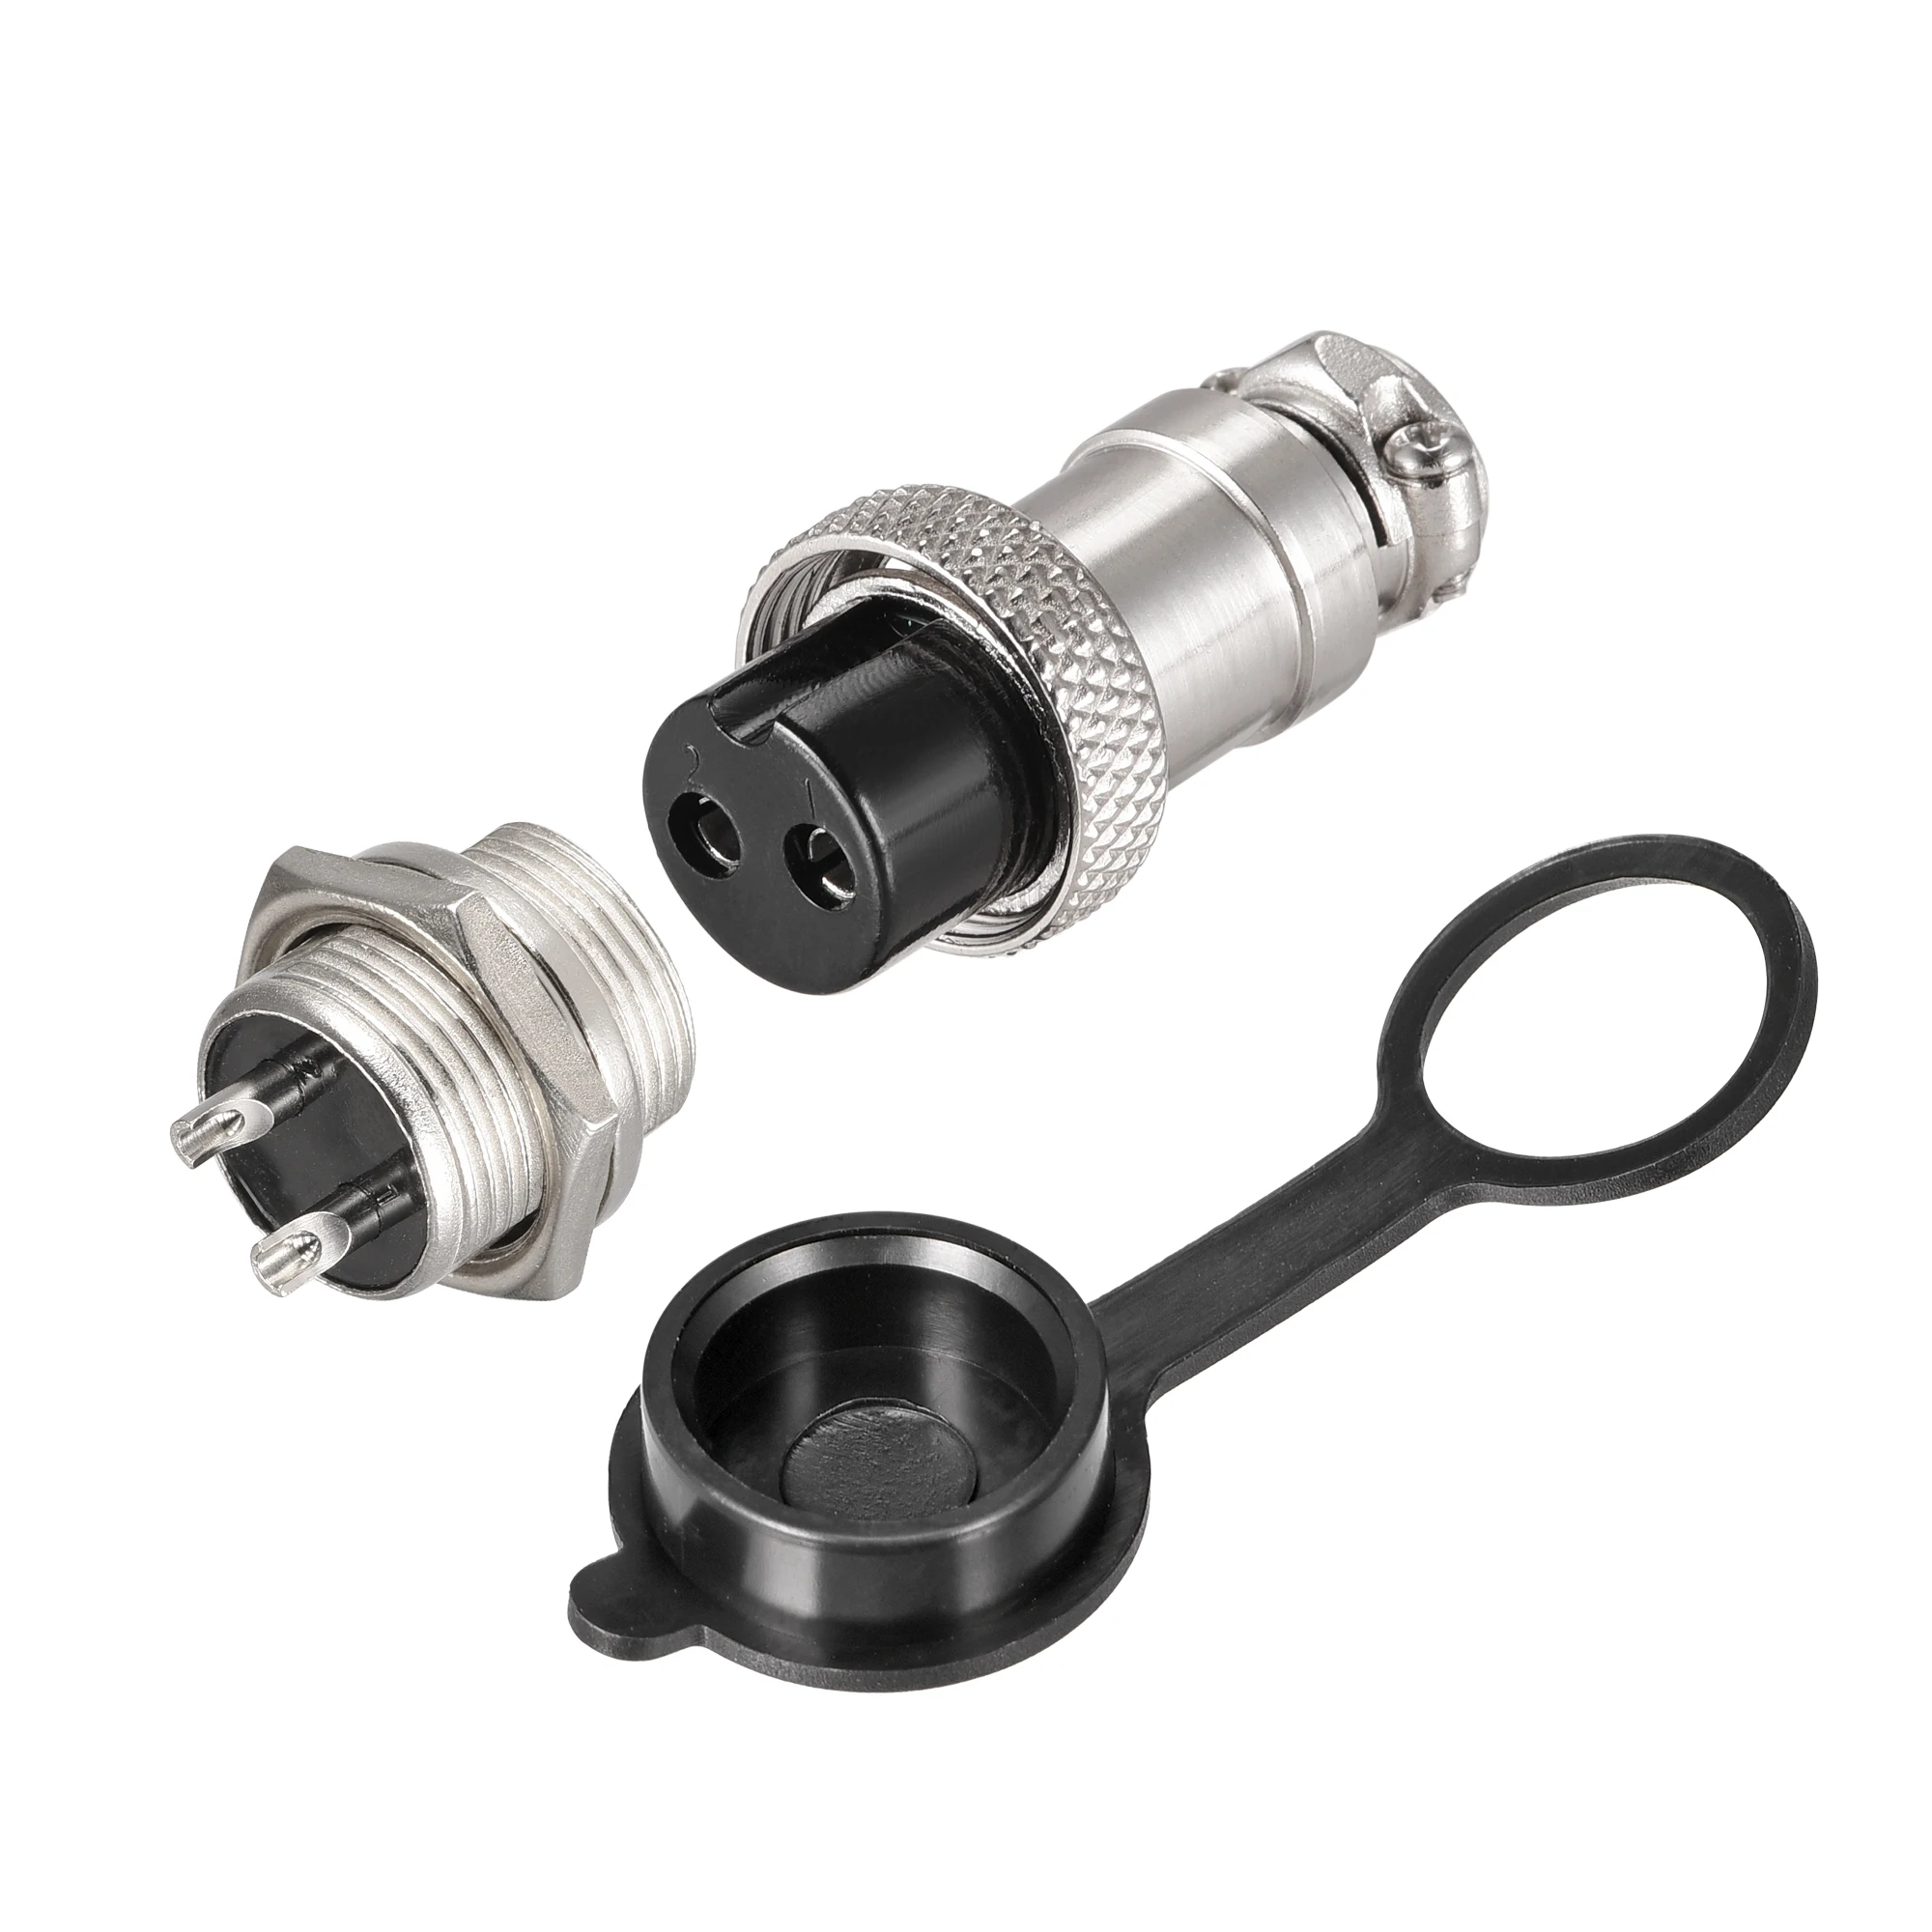 

2Set GX16 16mm 2 Terminals 7A 400V Aviation Connector Waterproof Dust Cap Male Female Panel Connector Fittings with Plug Cover